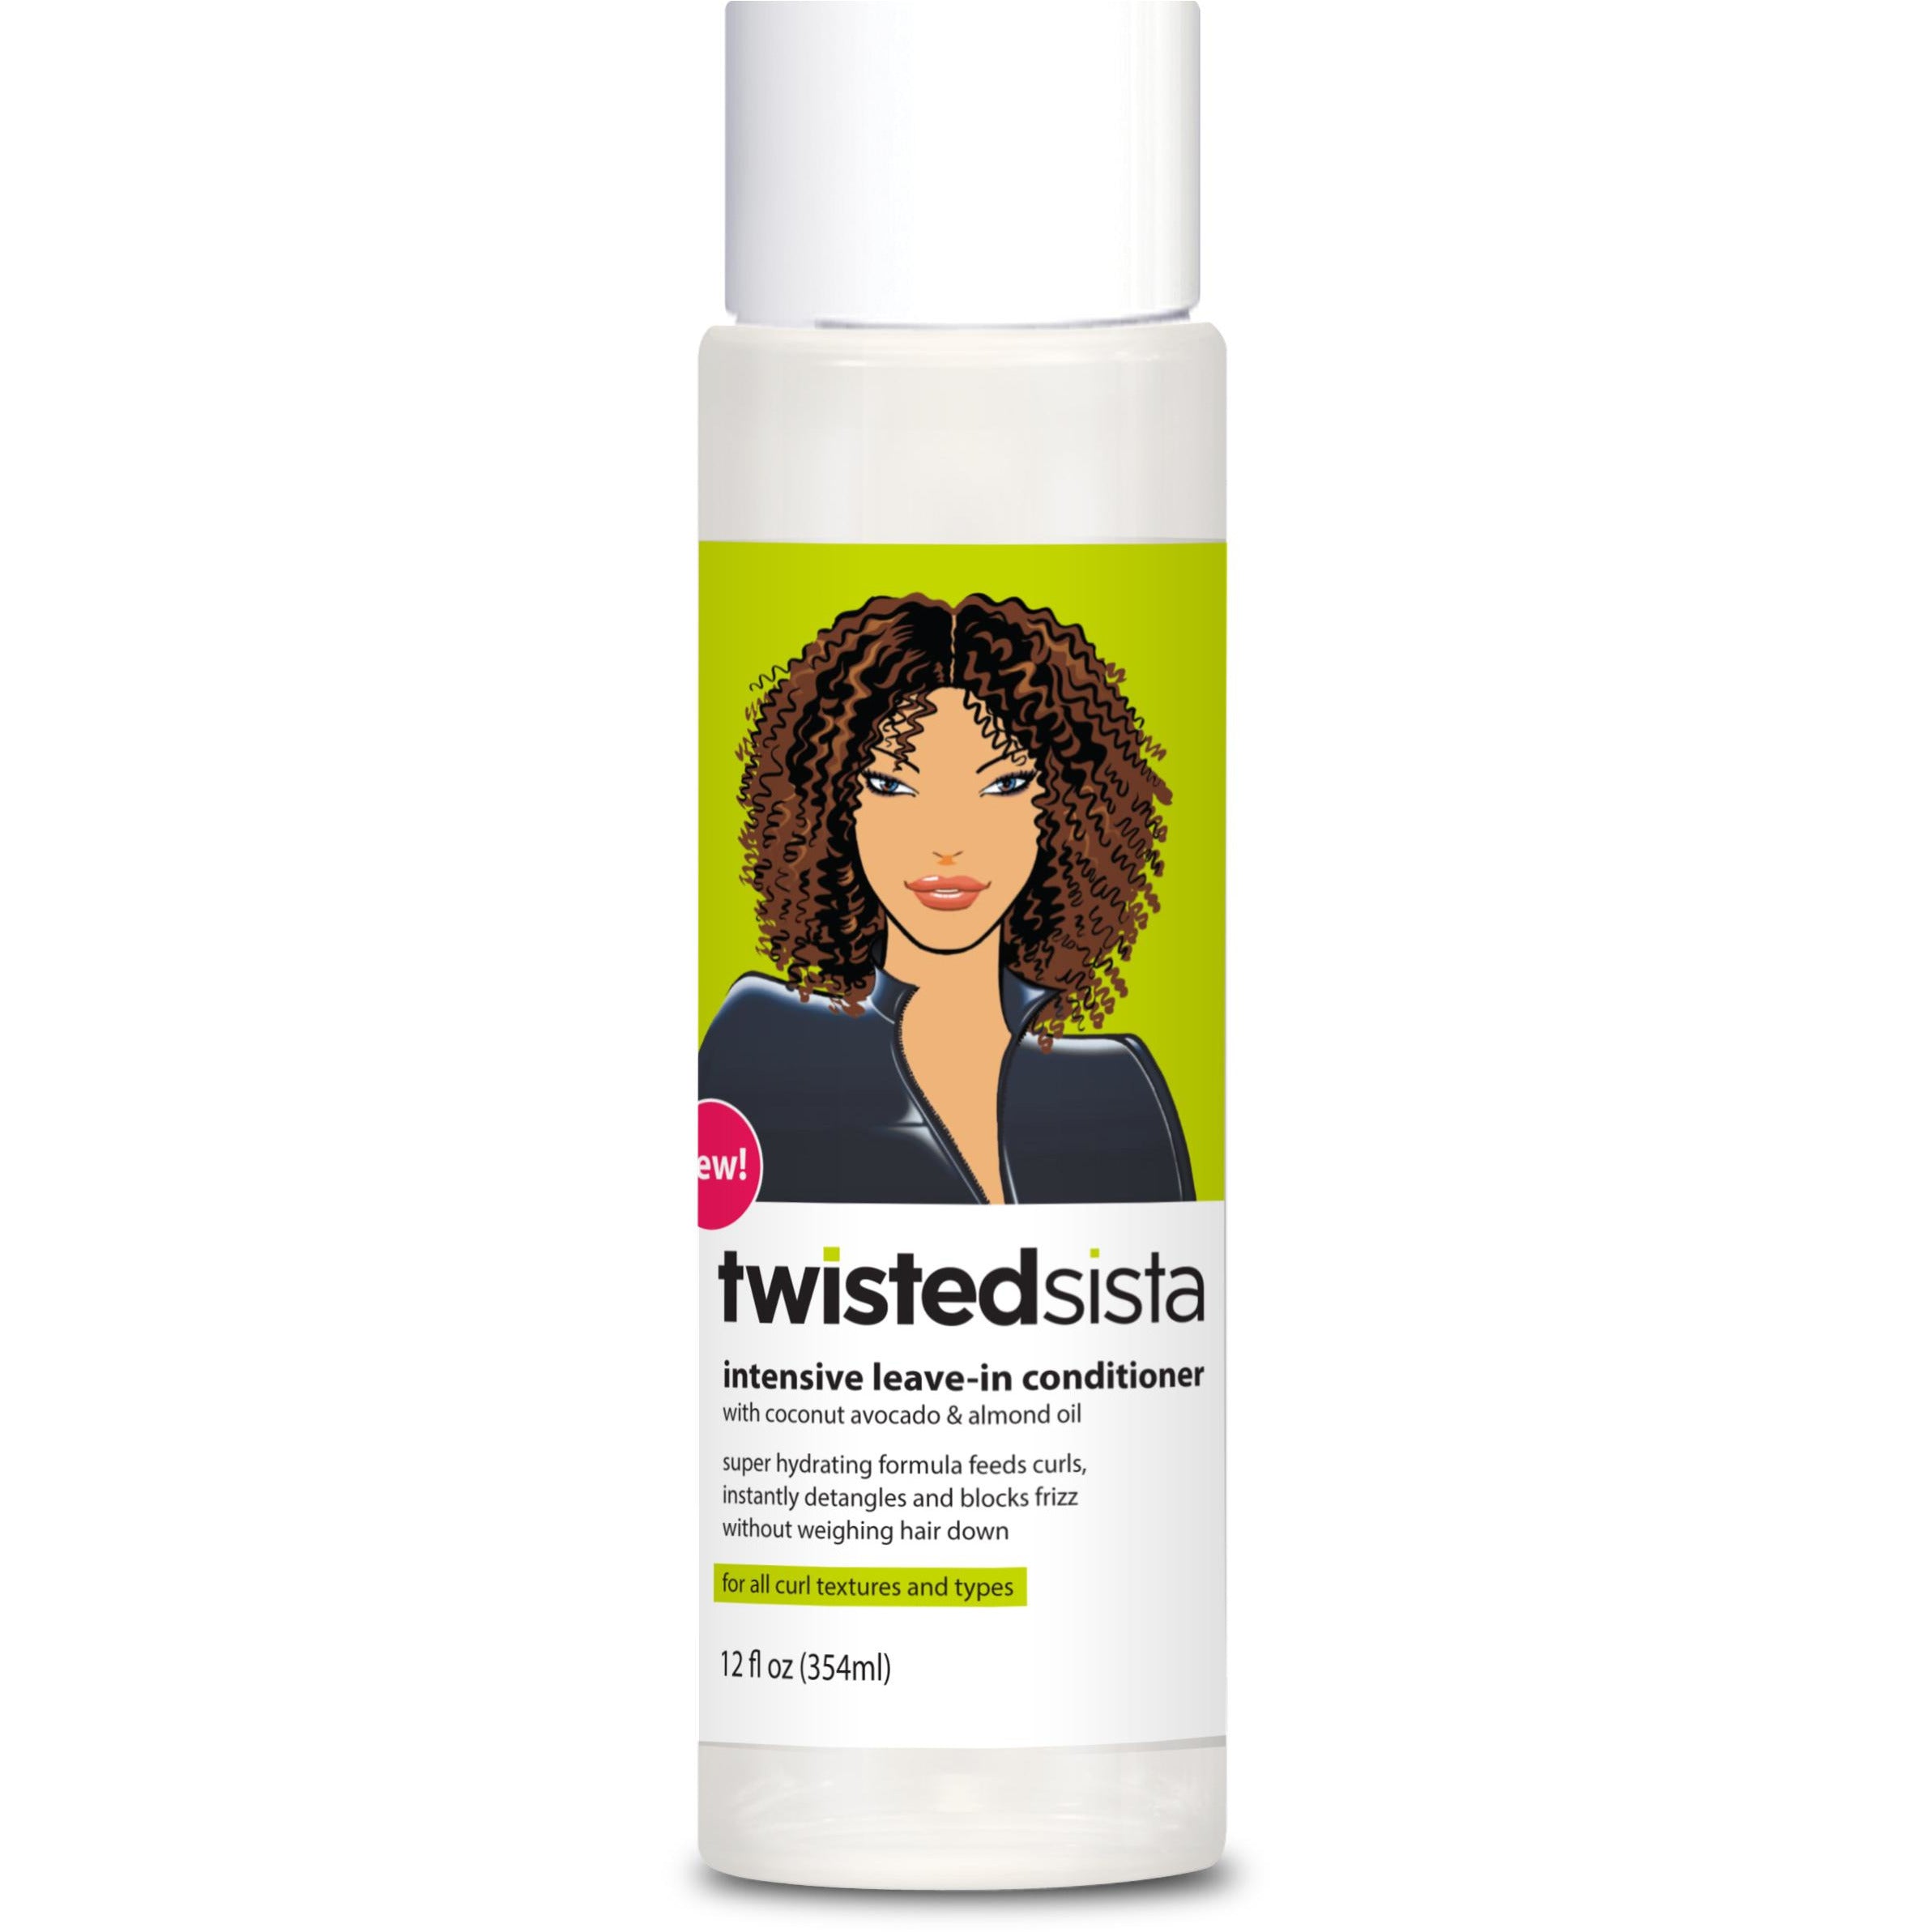 4th Ave Market: Twisted Sista Intensive Leave-In Conditioner 12 fl. oz